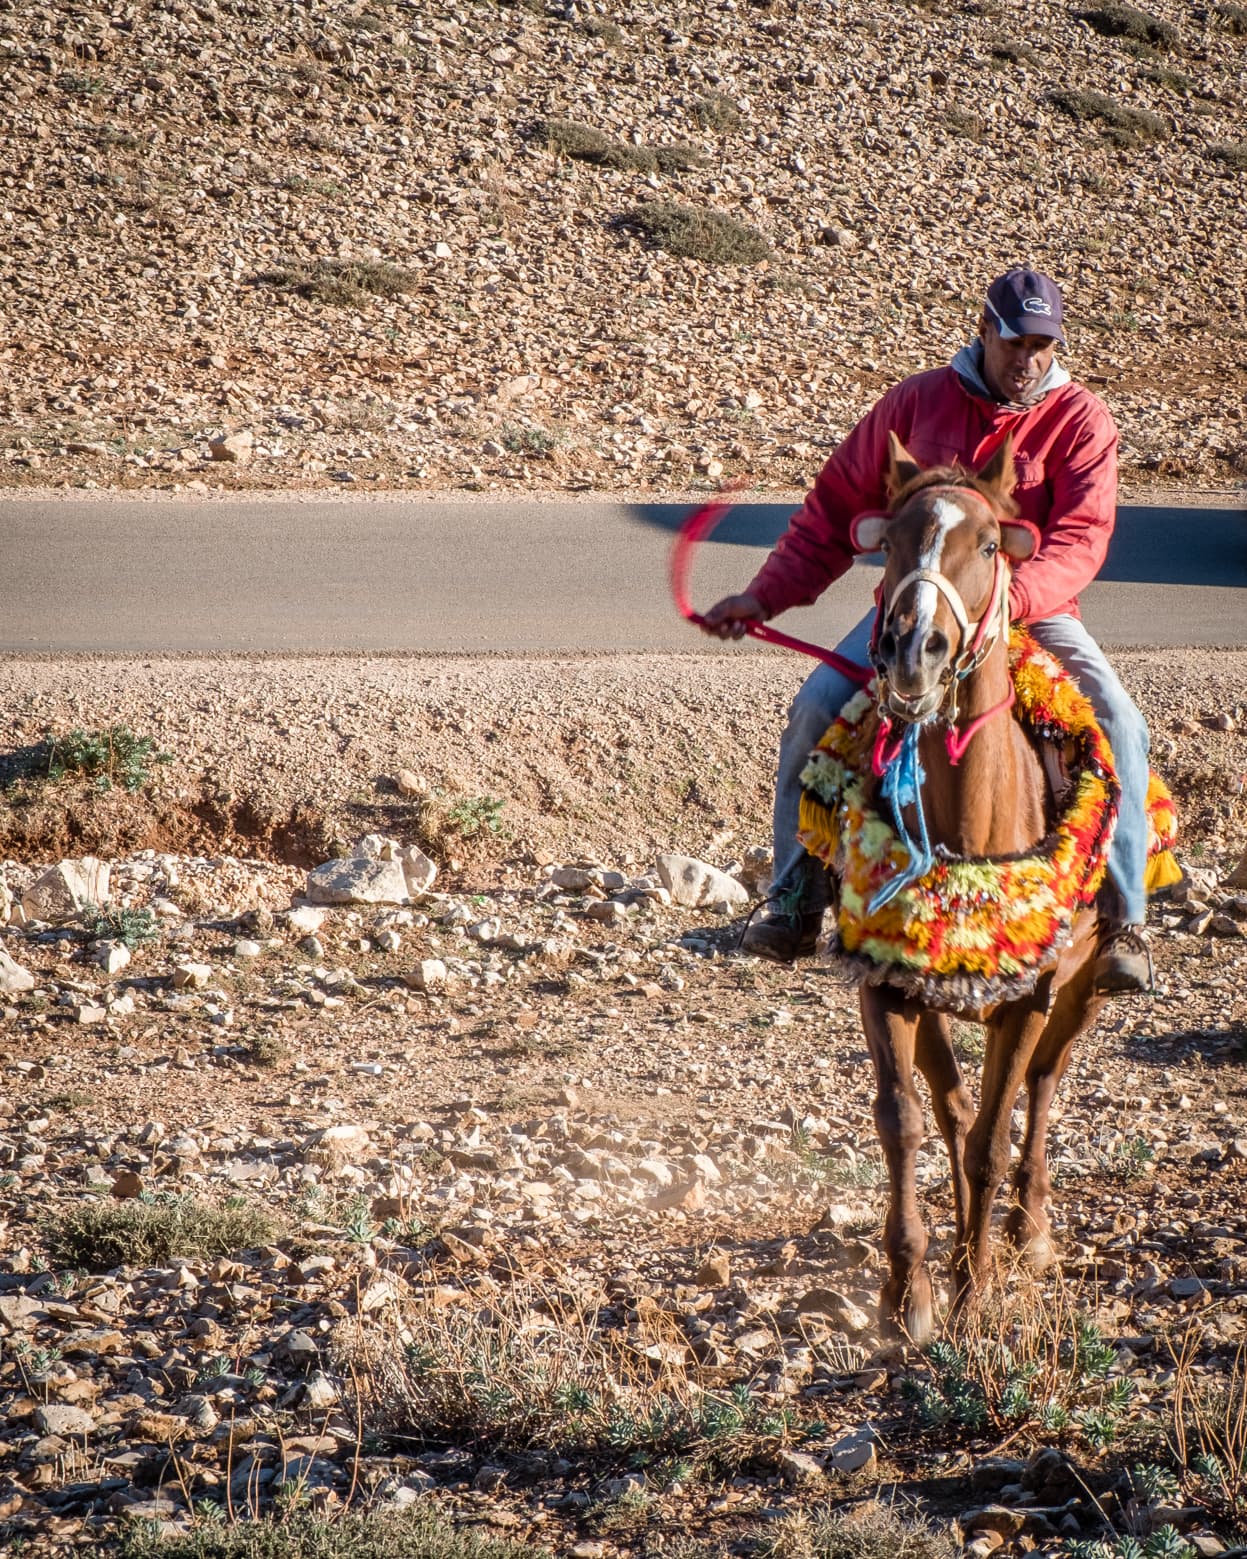 A man riding a horse in Ifrane, Morocco